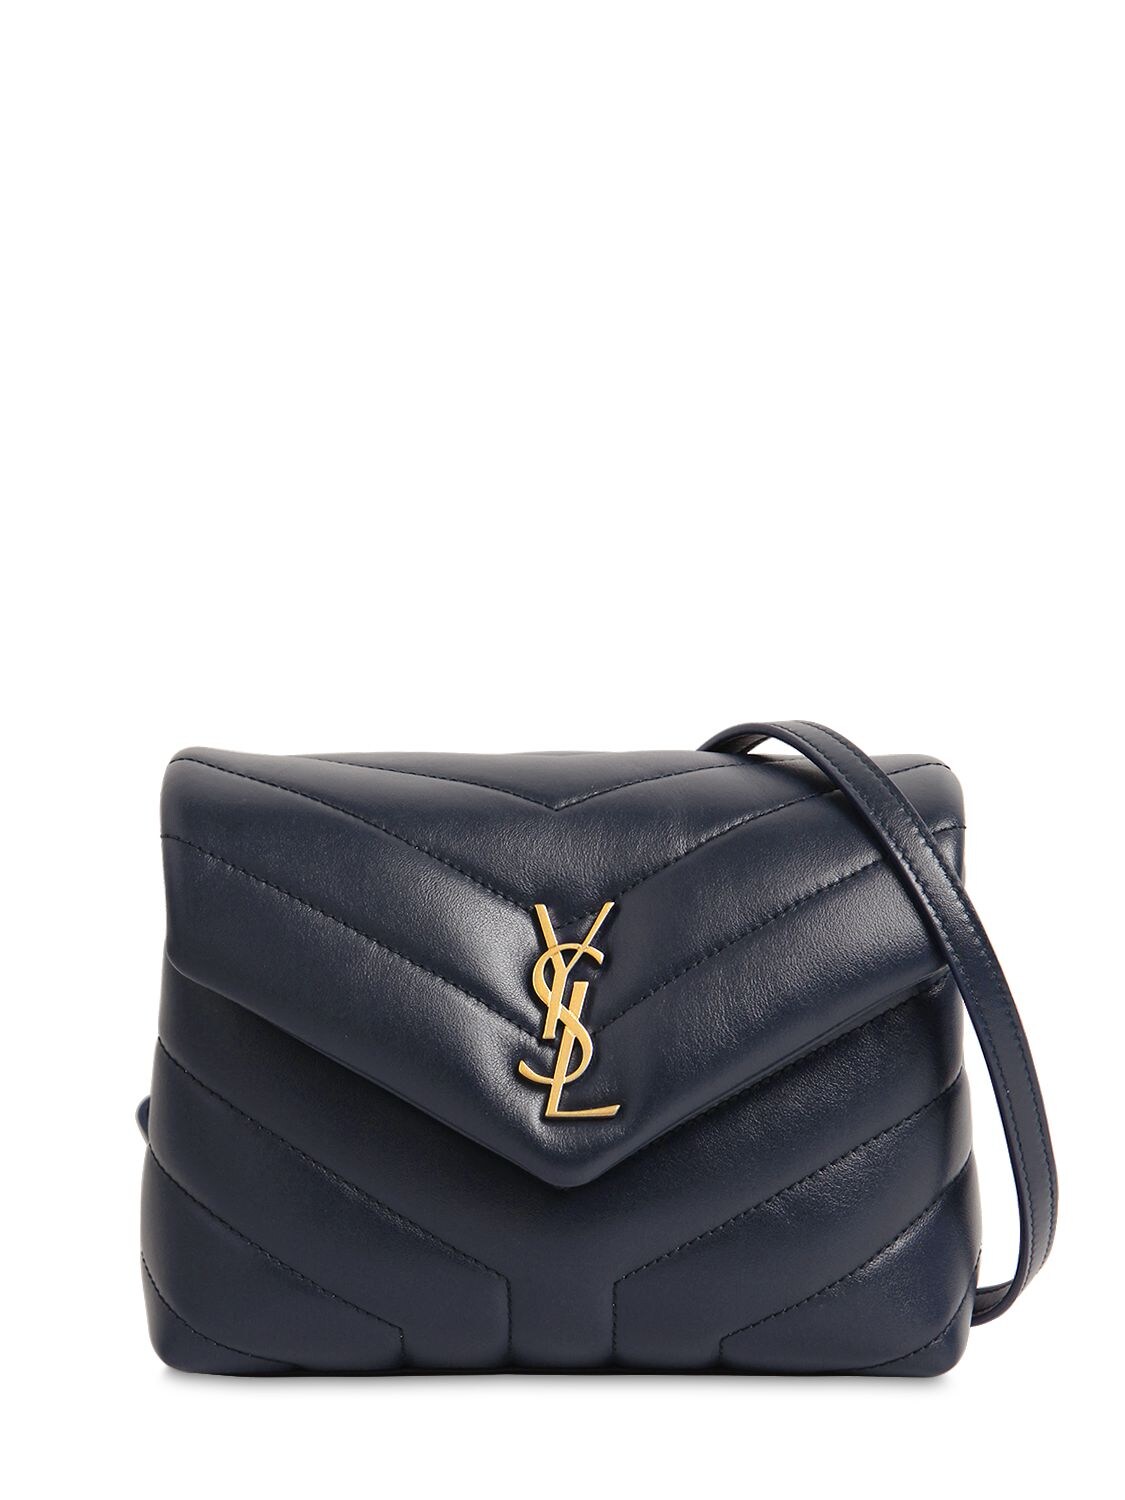 Saint Laurent Toy Loulou Monogram Leather Bag In Blue